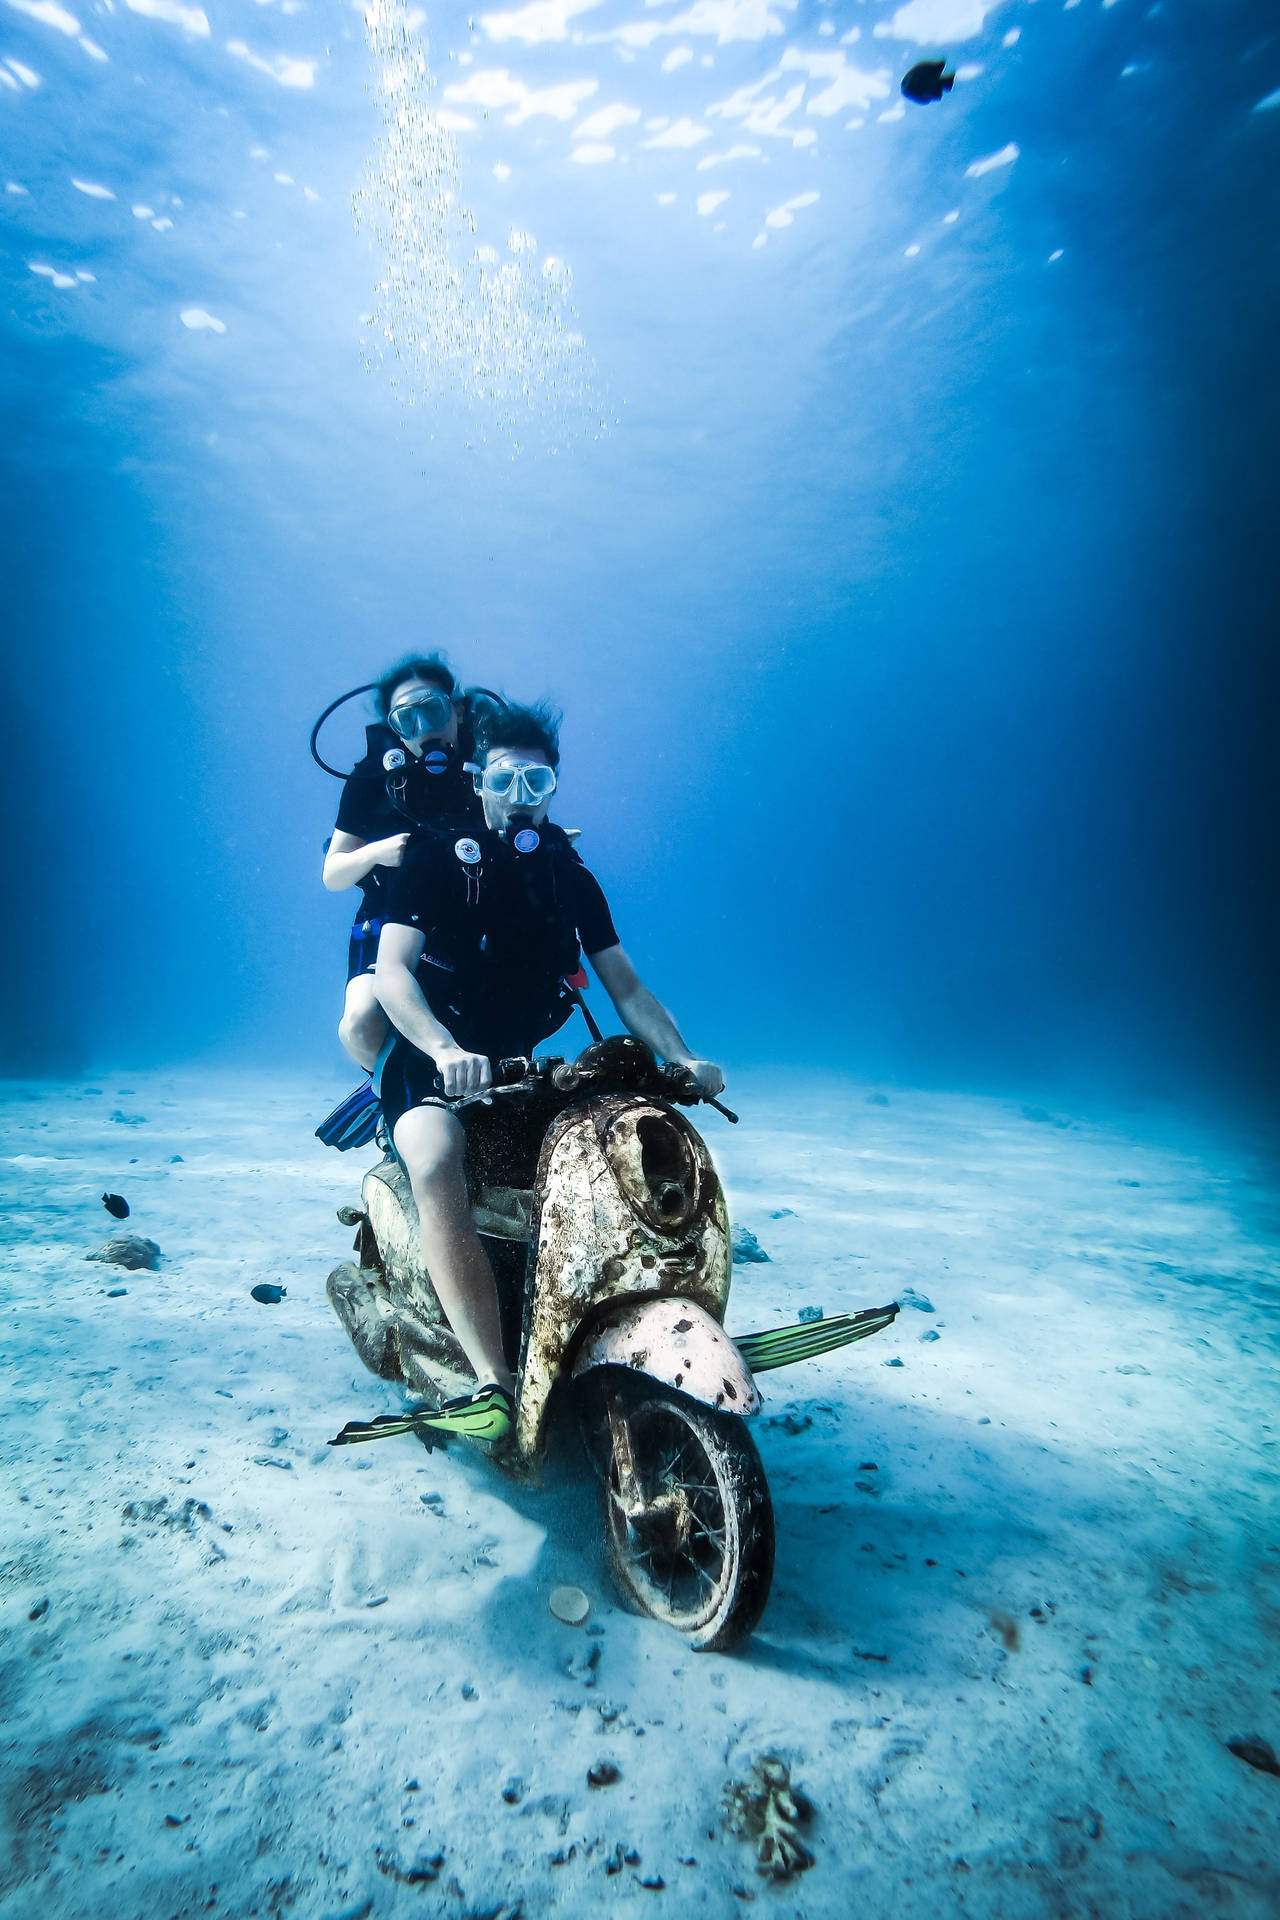 Scuba Diving And Riding Motorcycle Underwater